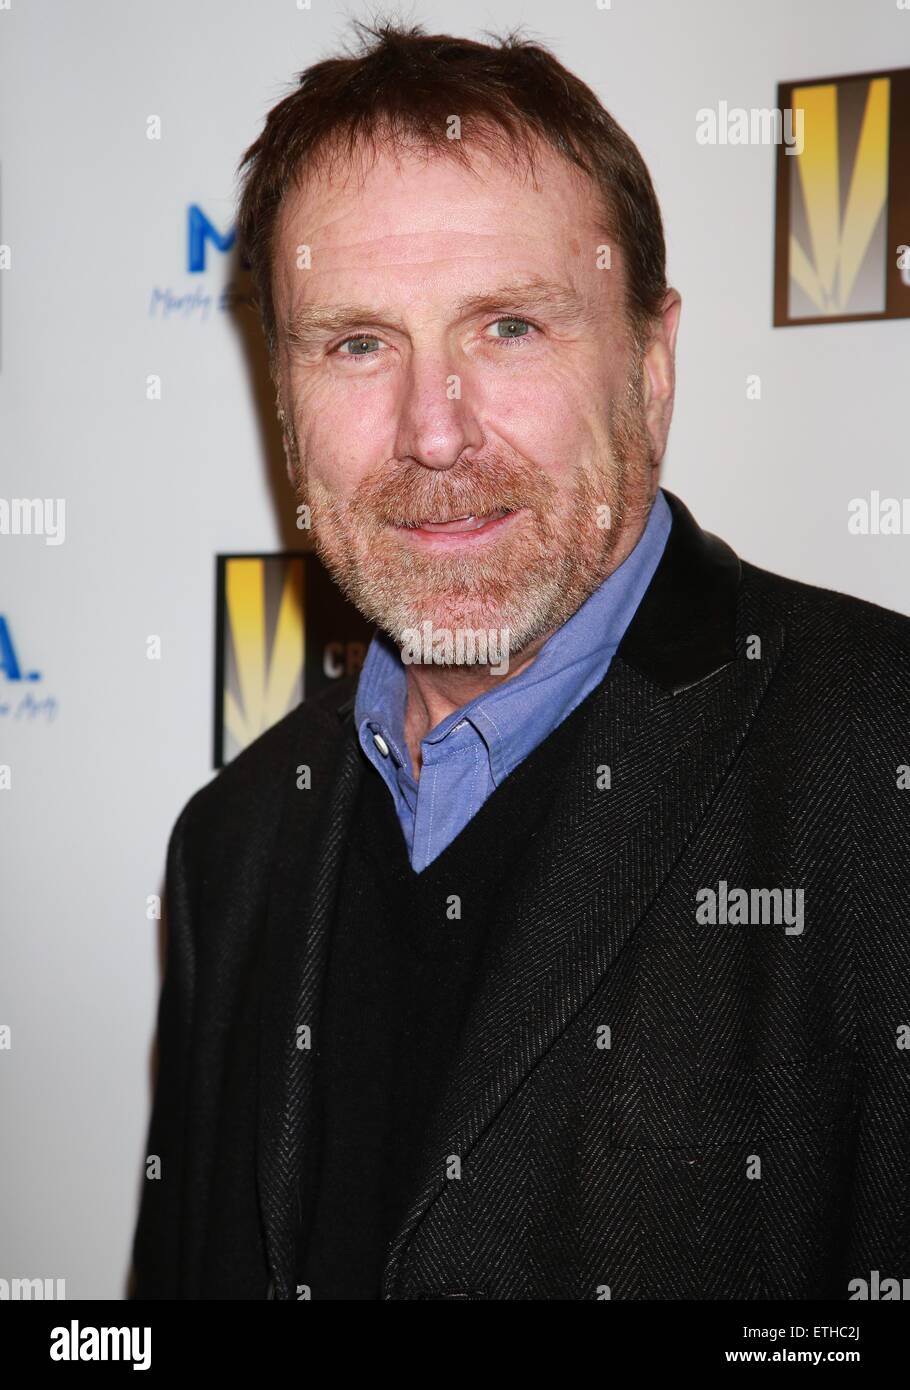 New York premiere party of 'Cop Show' at Caroline's On Broadway Comedy Club - Arrivals  Featuring: Colin Quinn Where: New York, New York, United States When: 23 Feb 2015 Credit: Joseph Marzullo/WENN.com Stock Photo